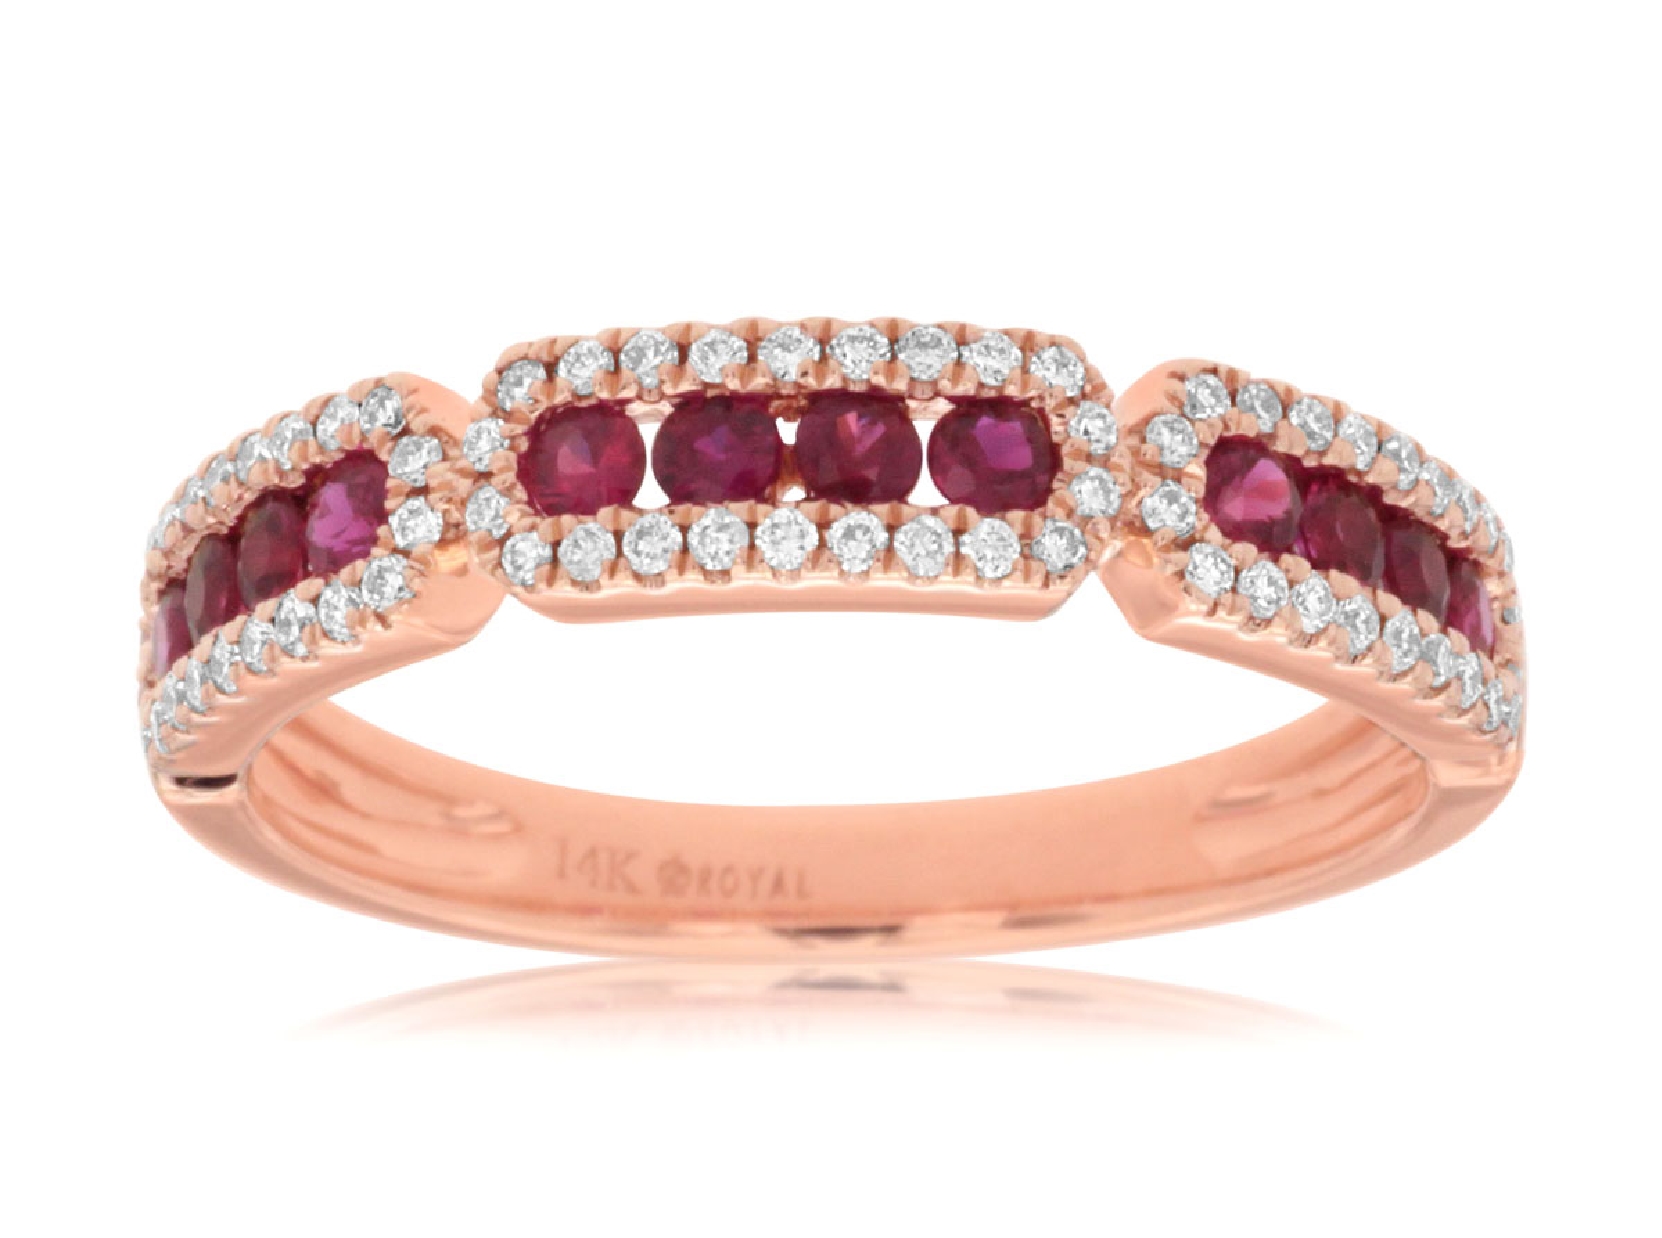 14K Rose Gold Stackable Ring with Channel Set Rubies and Diamond Halos 
Size 7 .2CT Diamonds .42CT Rubies 
PC8095R